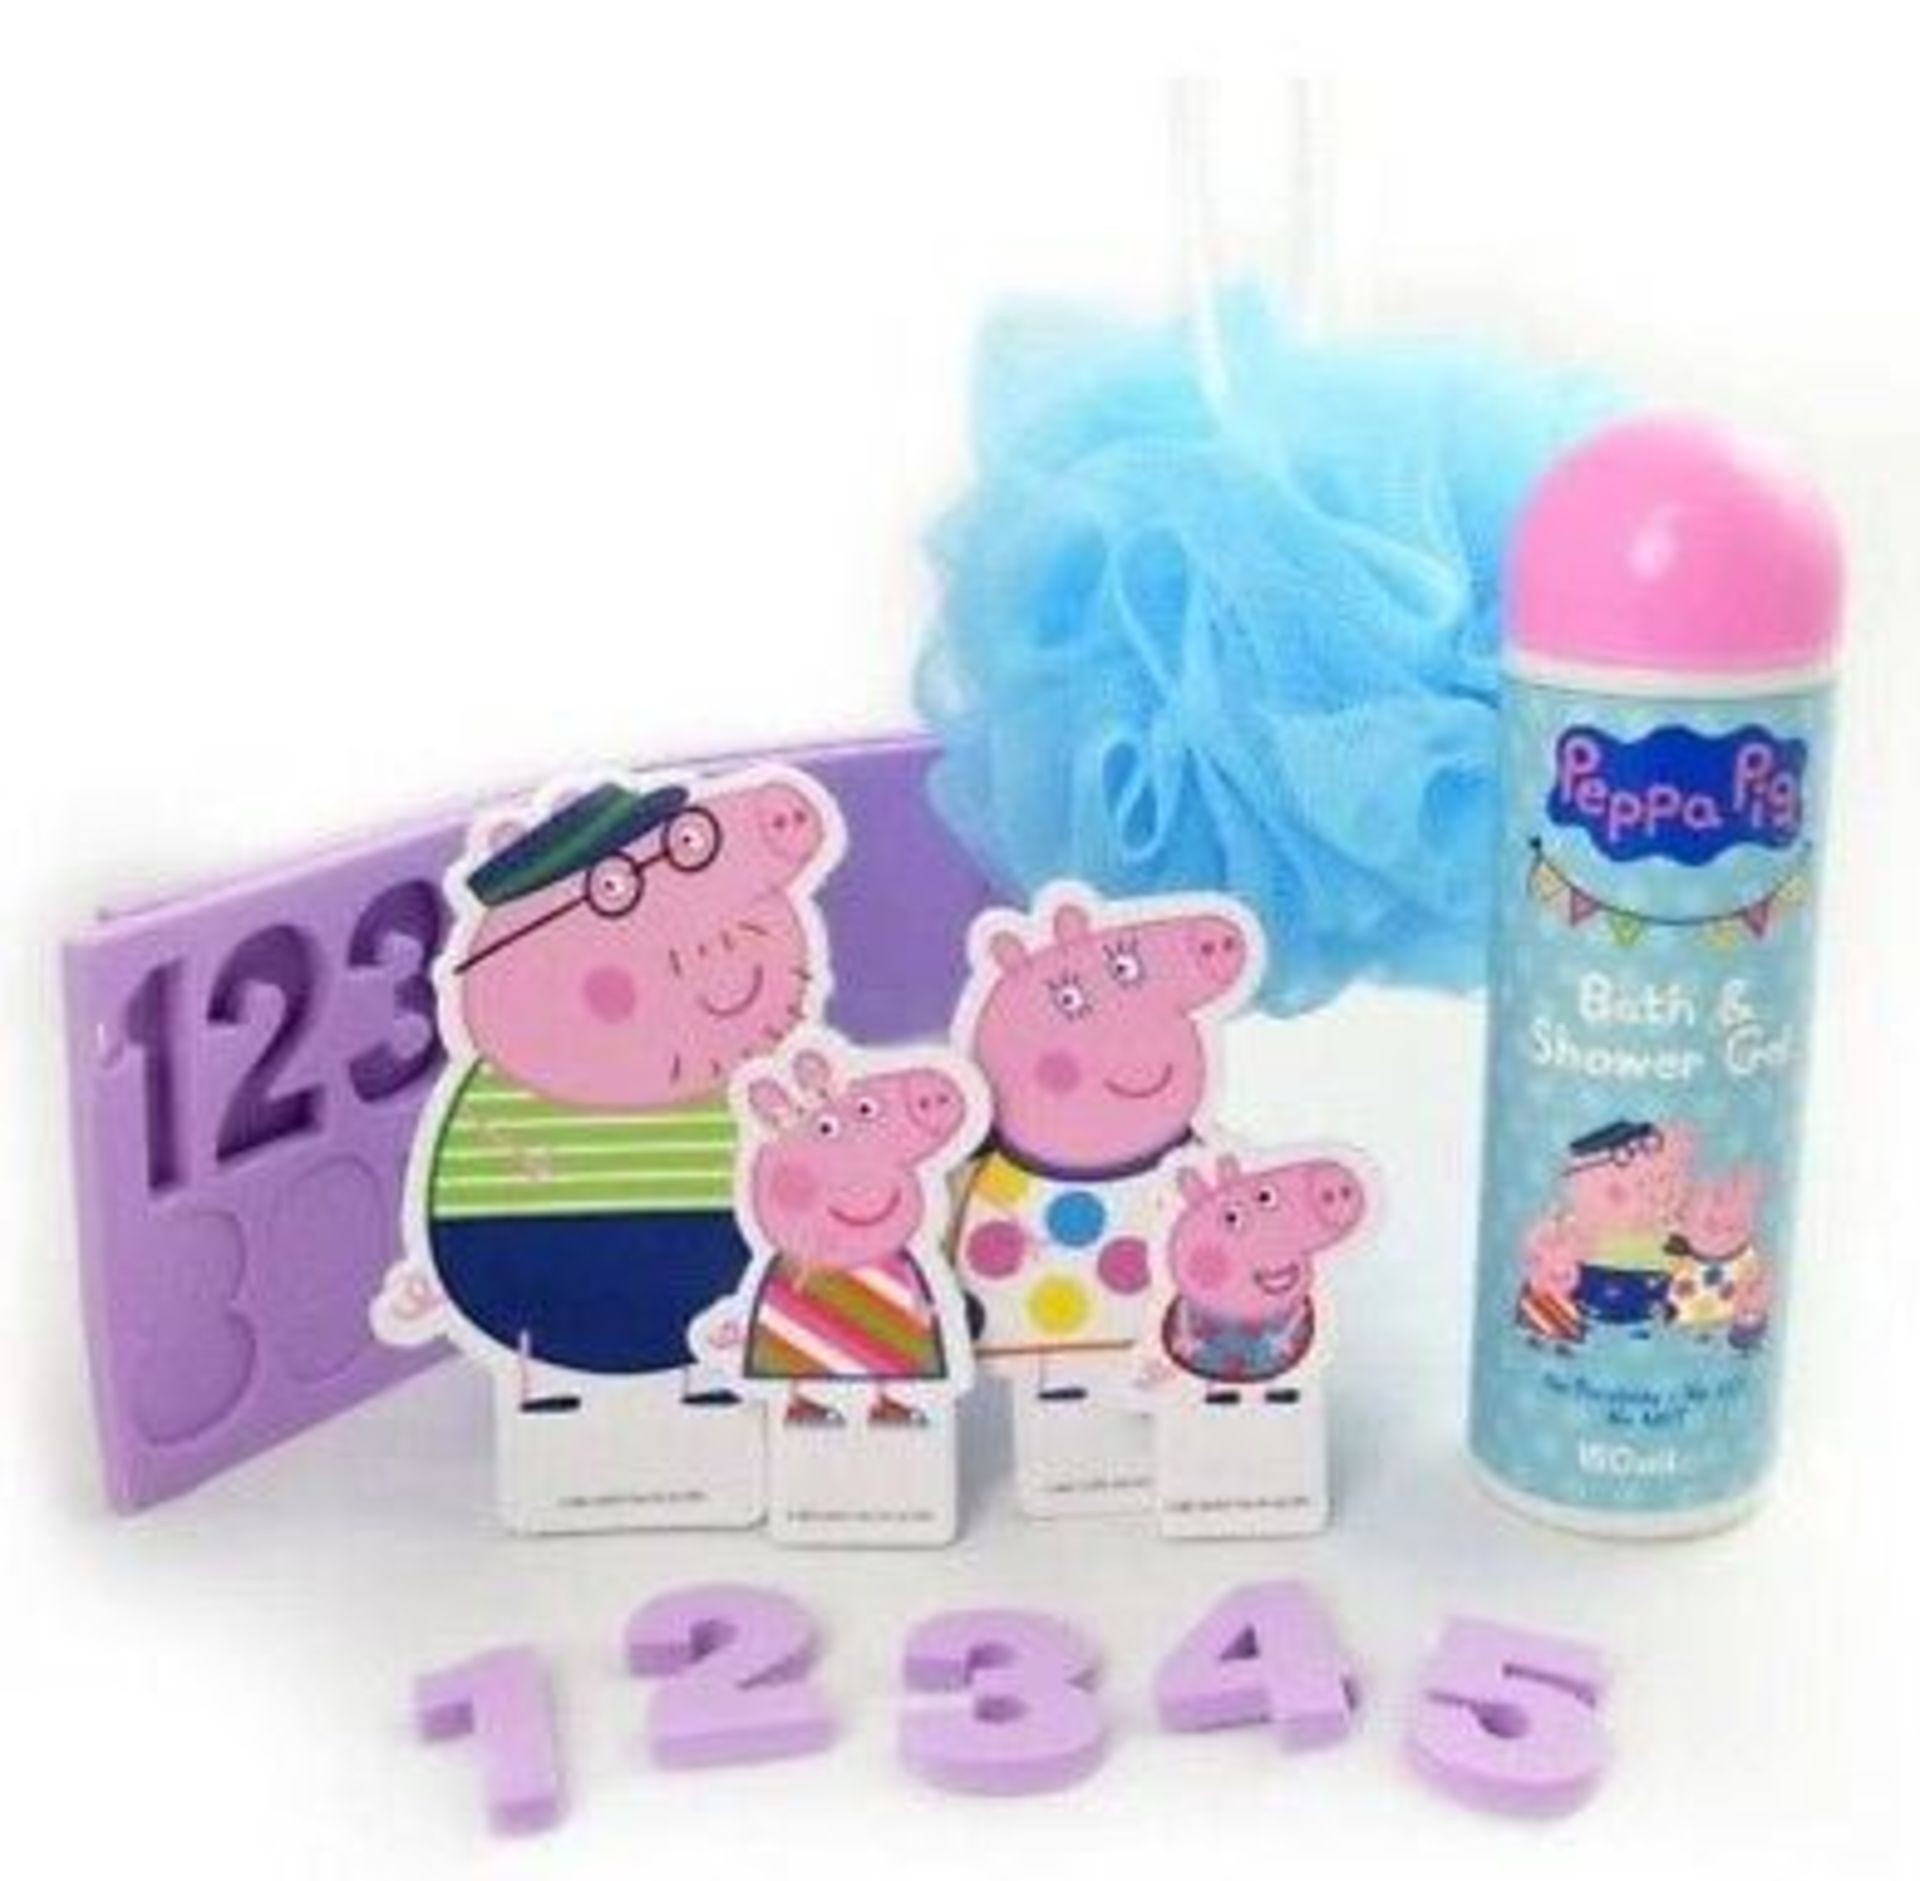 18 x Peppa Pig Campervan Bath Sets (with cut-out Peppa Pig characters, bath numbers, - Image 3 of 3